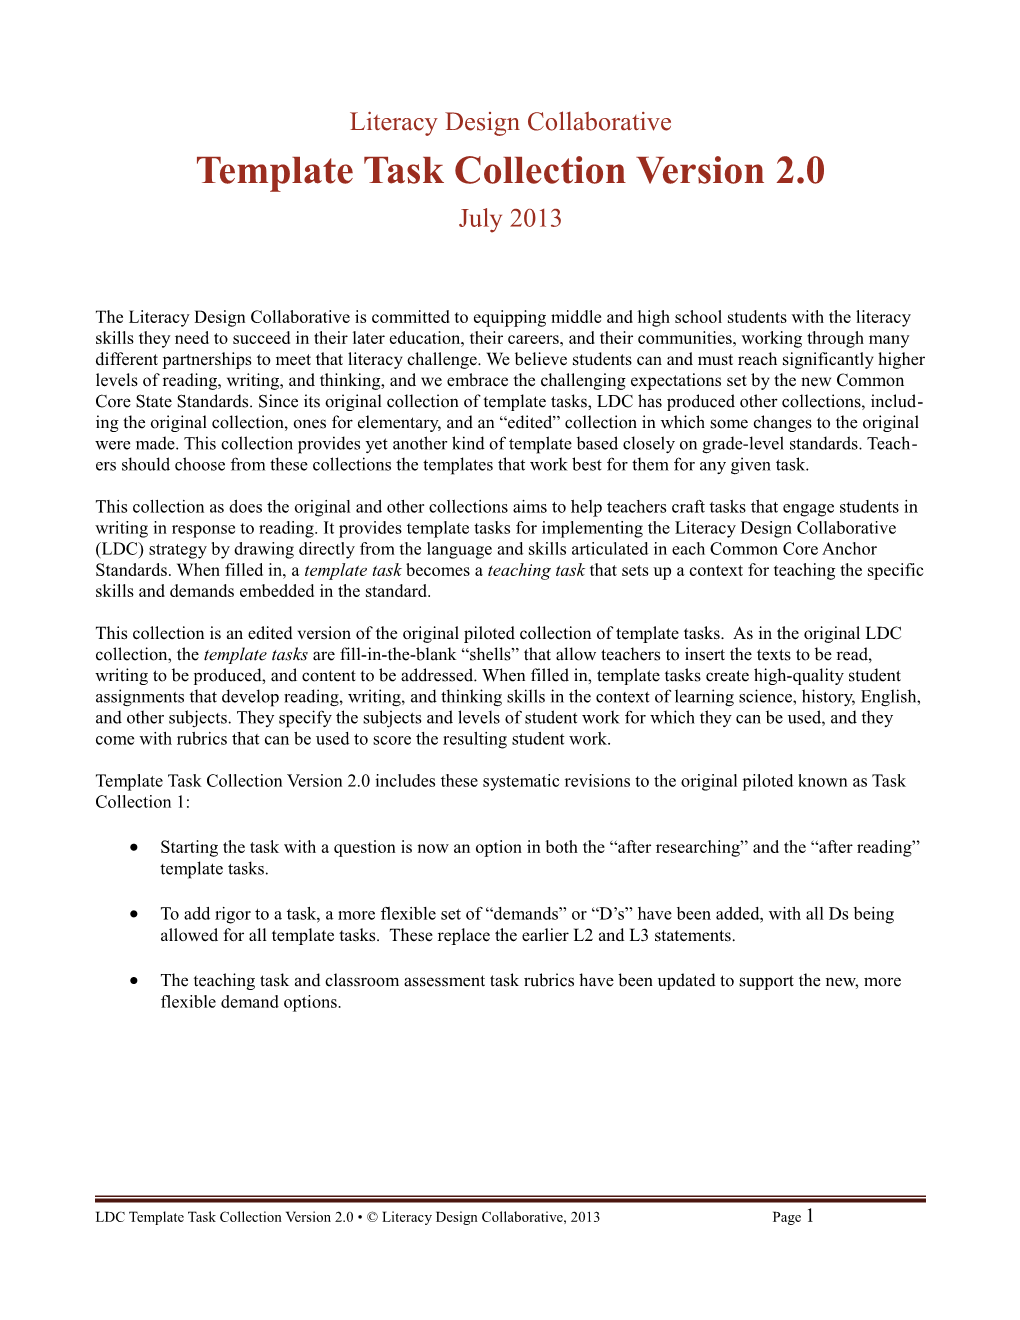 Template Task Collection Version 2.0